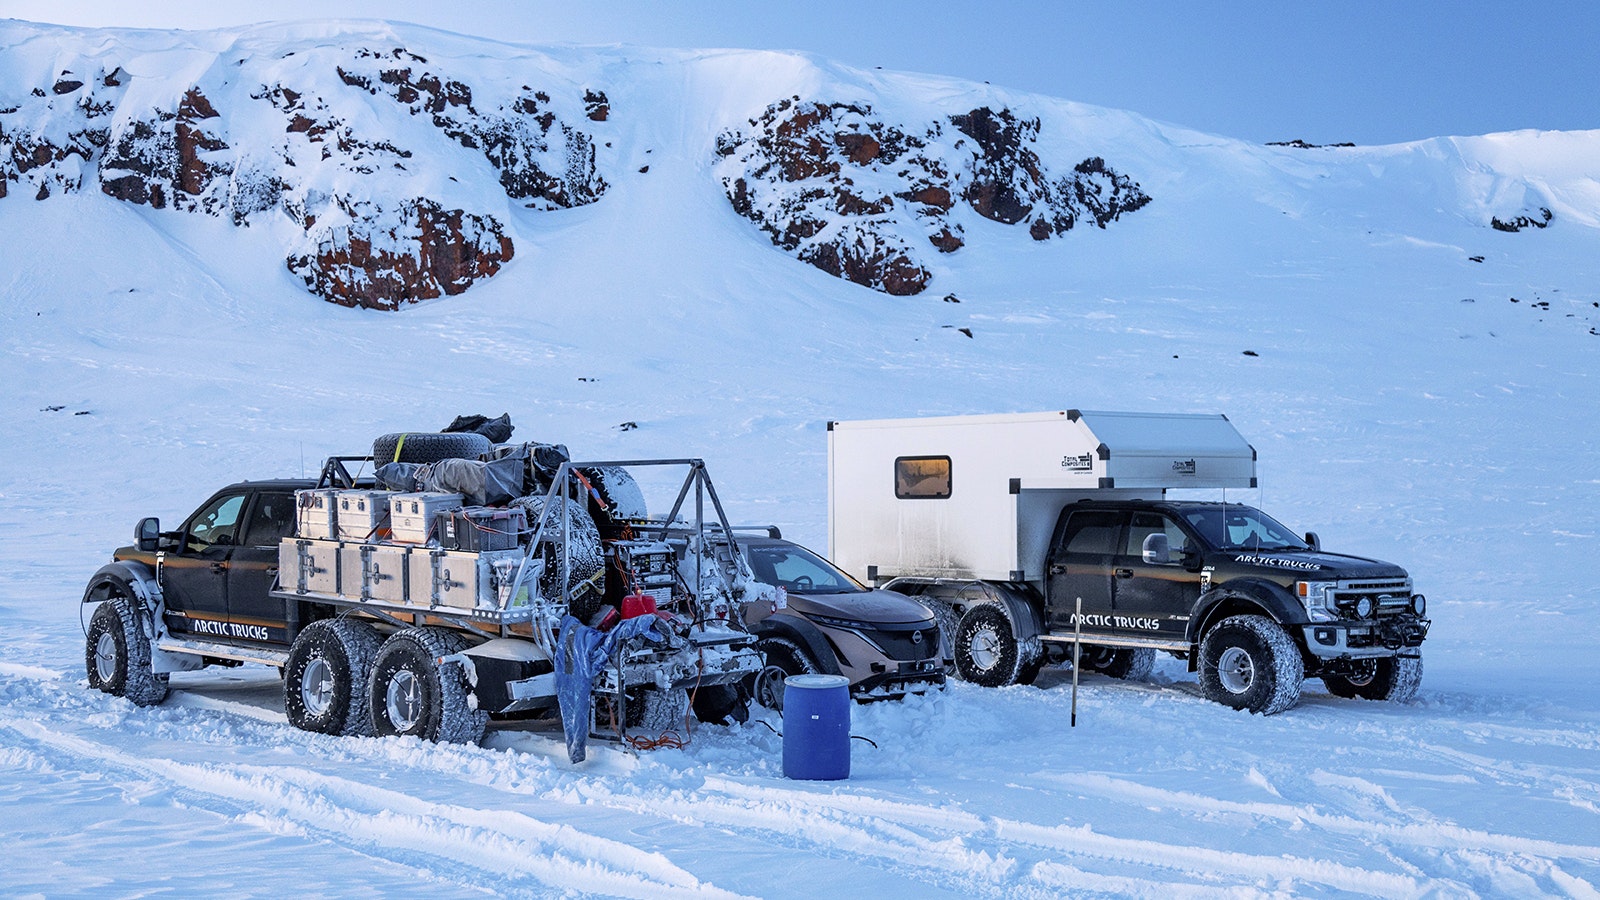 Ford F-350s customized by the Arctic Trucks North America shop In Cheyenne were driven from Cheyenne to the Magnetic North Pole in extreme northern Canada. They escorted an electric SUV also customized by the company.